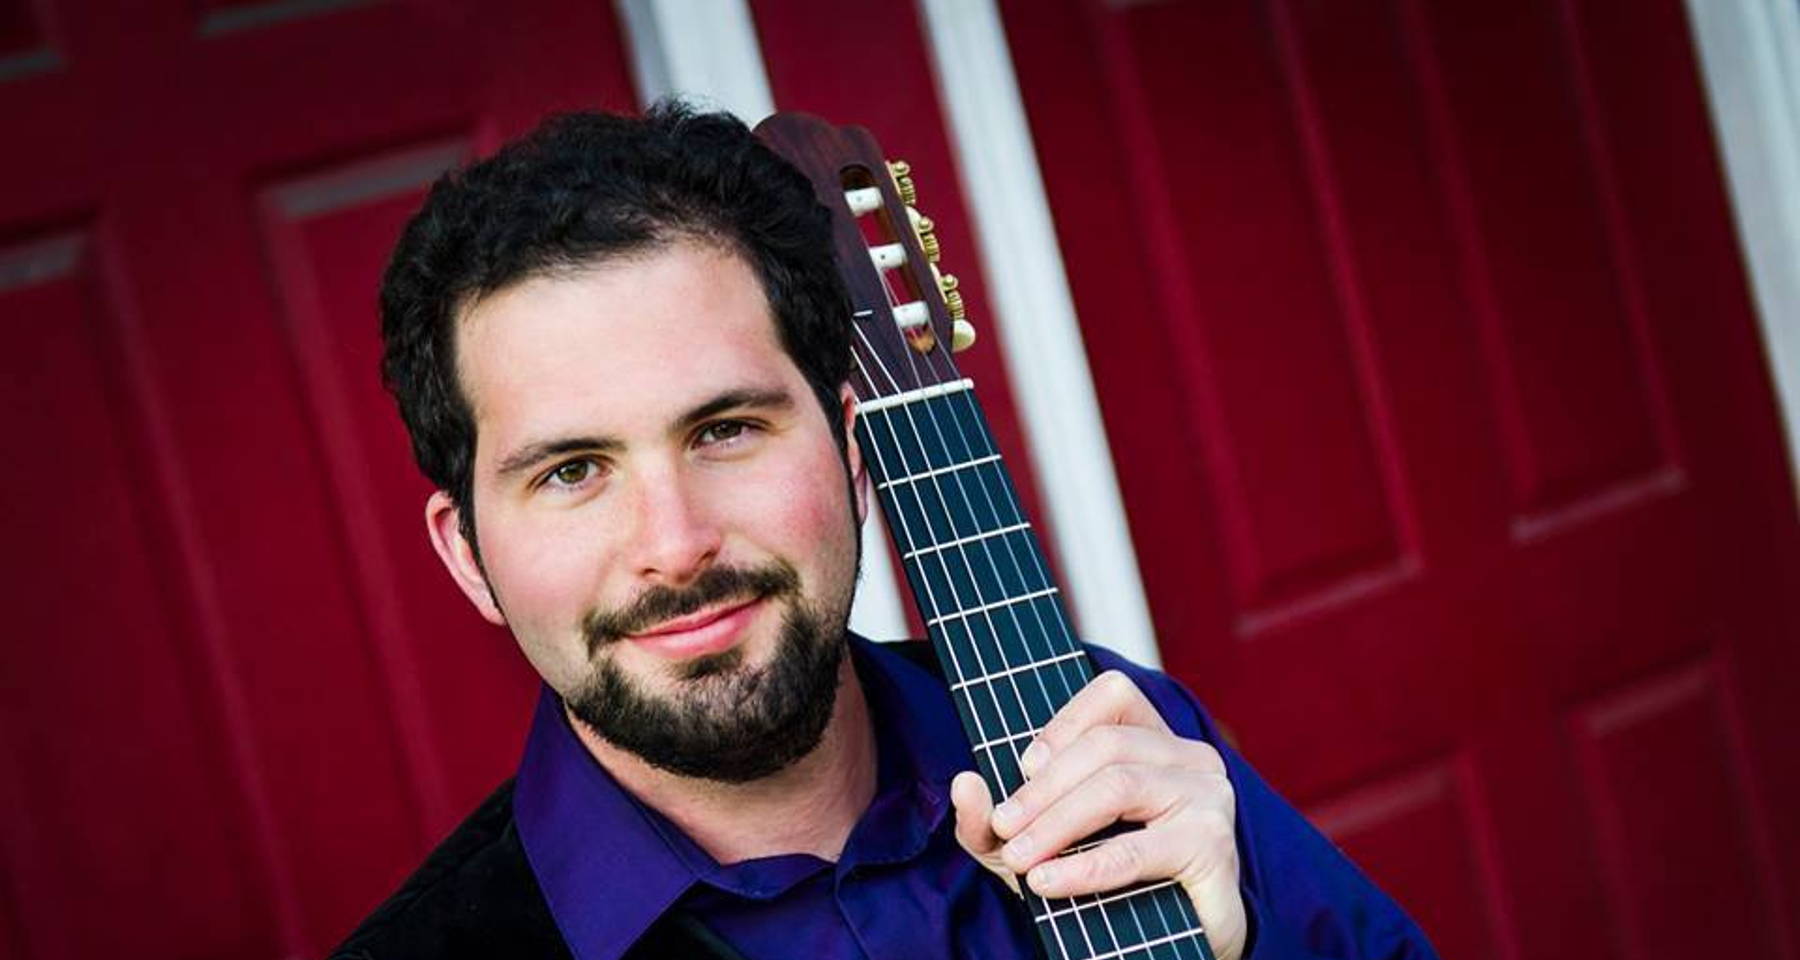 NOW OUTDOORS: New Years Eve Afternoon Concert: Classical Guitar with Lyle Sheffler | Featuring works by Piazolla, Albeniz, Scarlatti, and Barrios